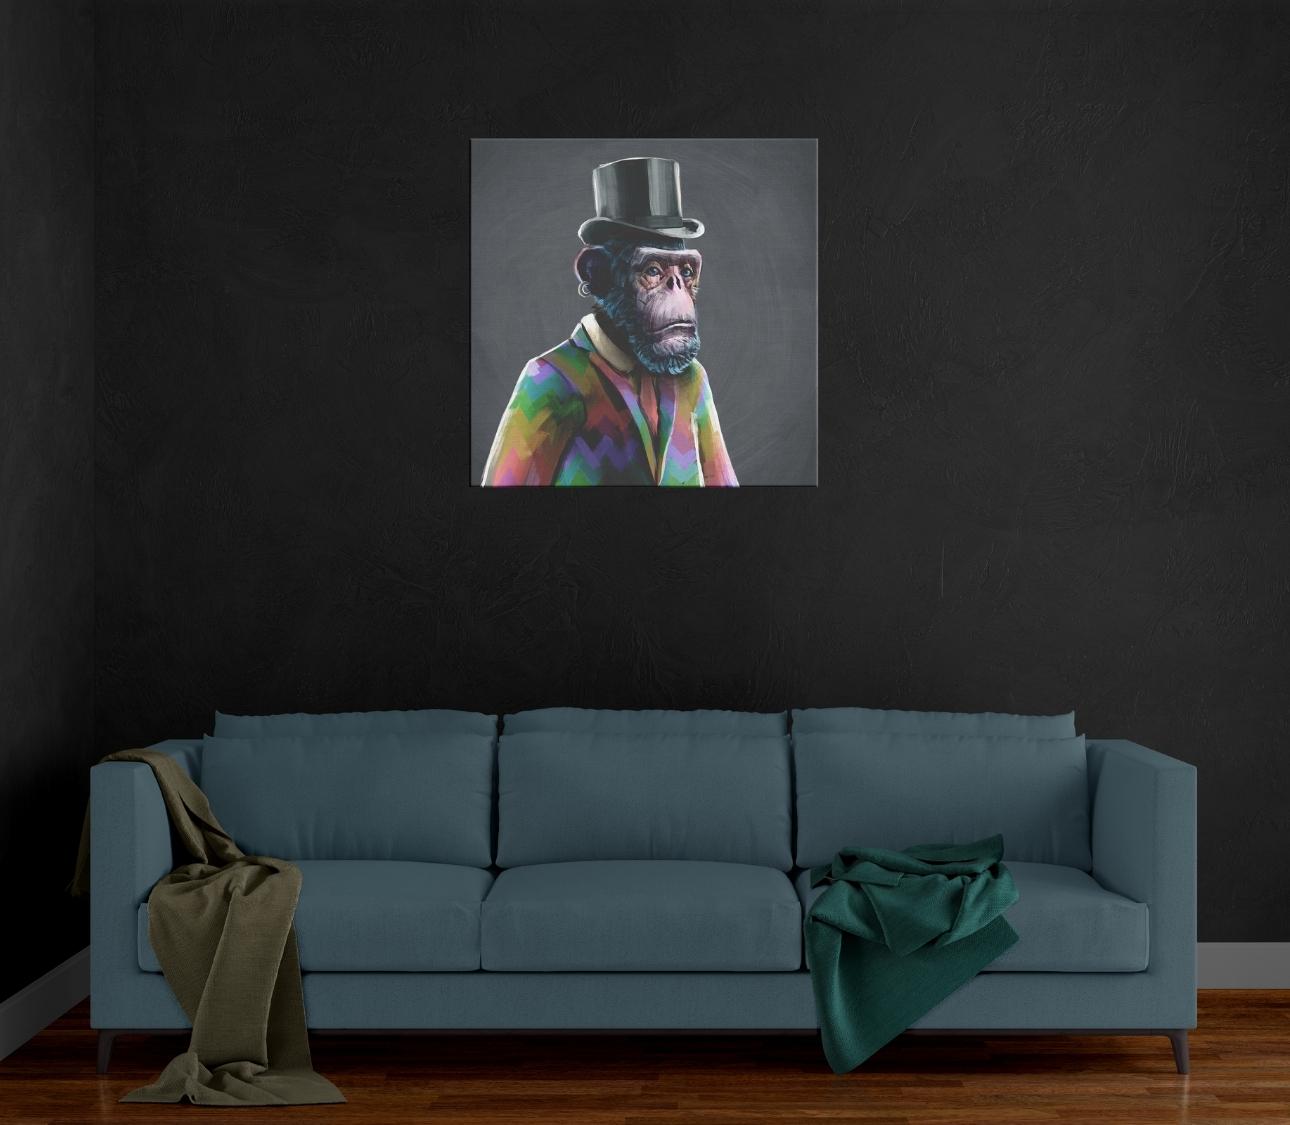 Image of a custom NFT canvas print hanging on the wall behind a couch